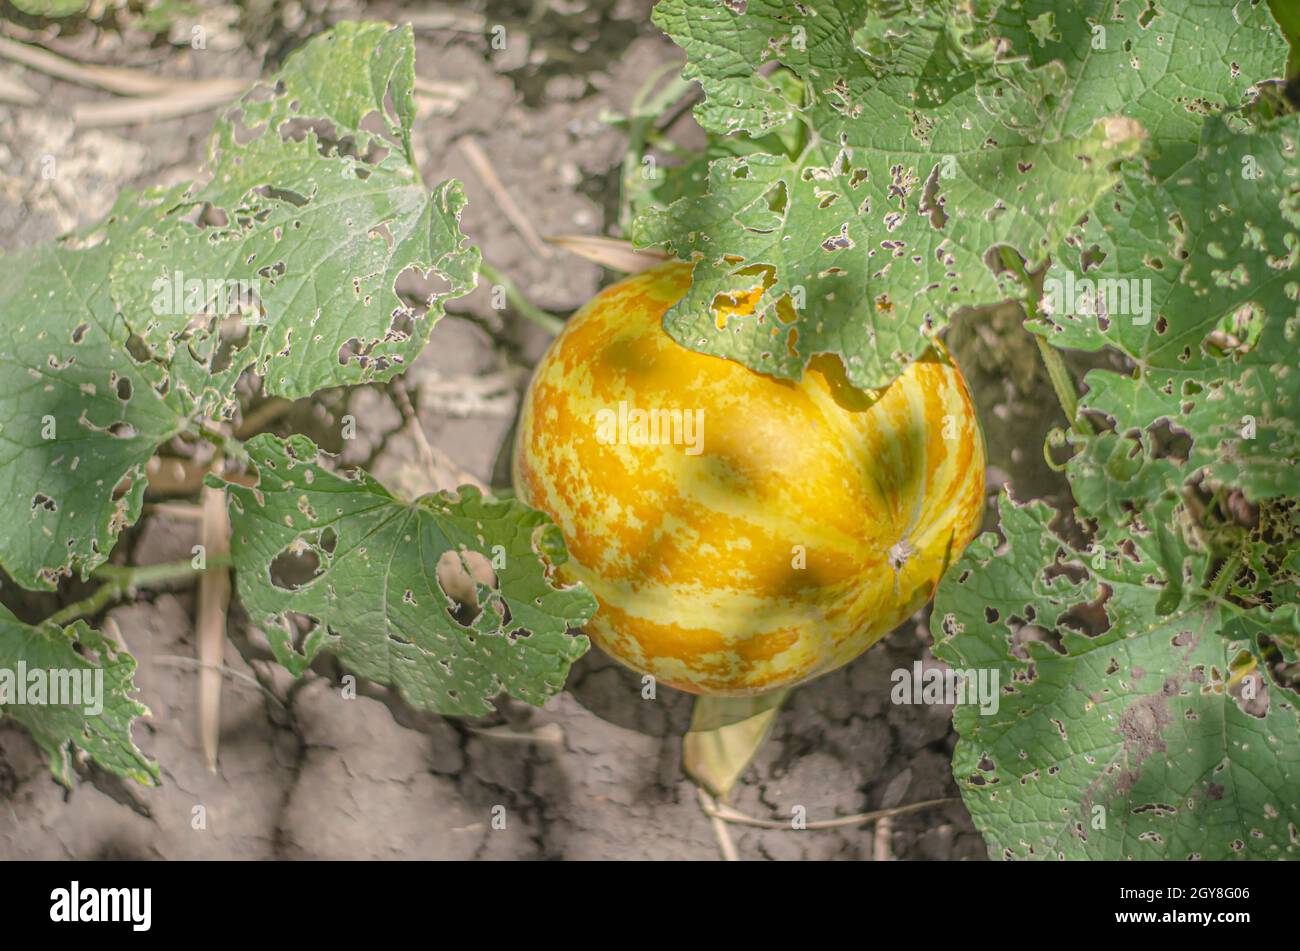 Thai cantaloupe or Yellow melon is a native fruit in Thailand. Planted in the garden around the house. Stock Photo